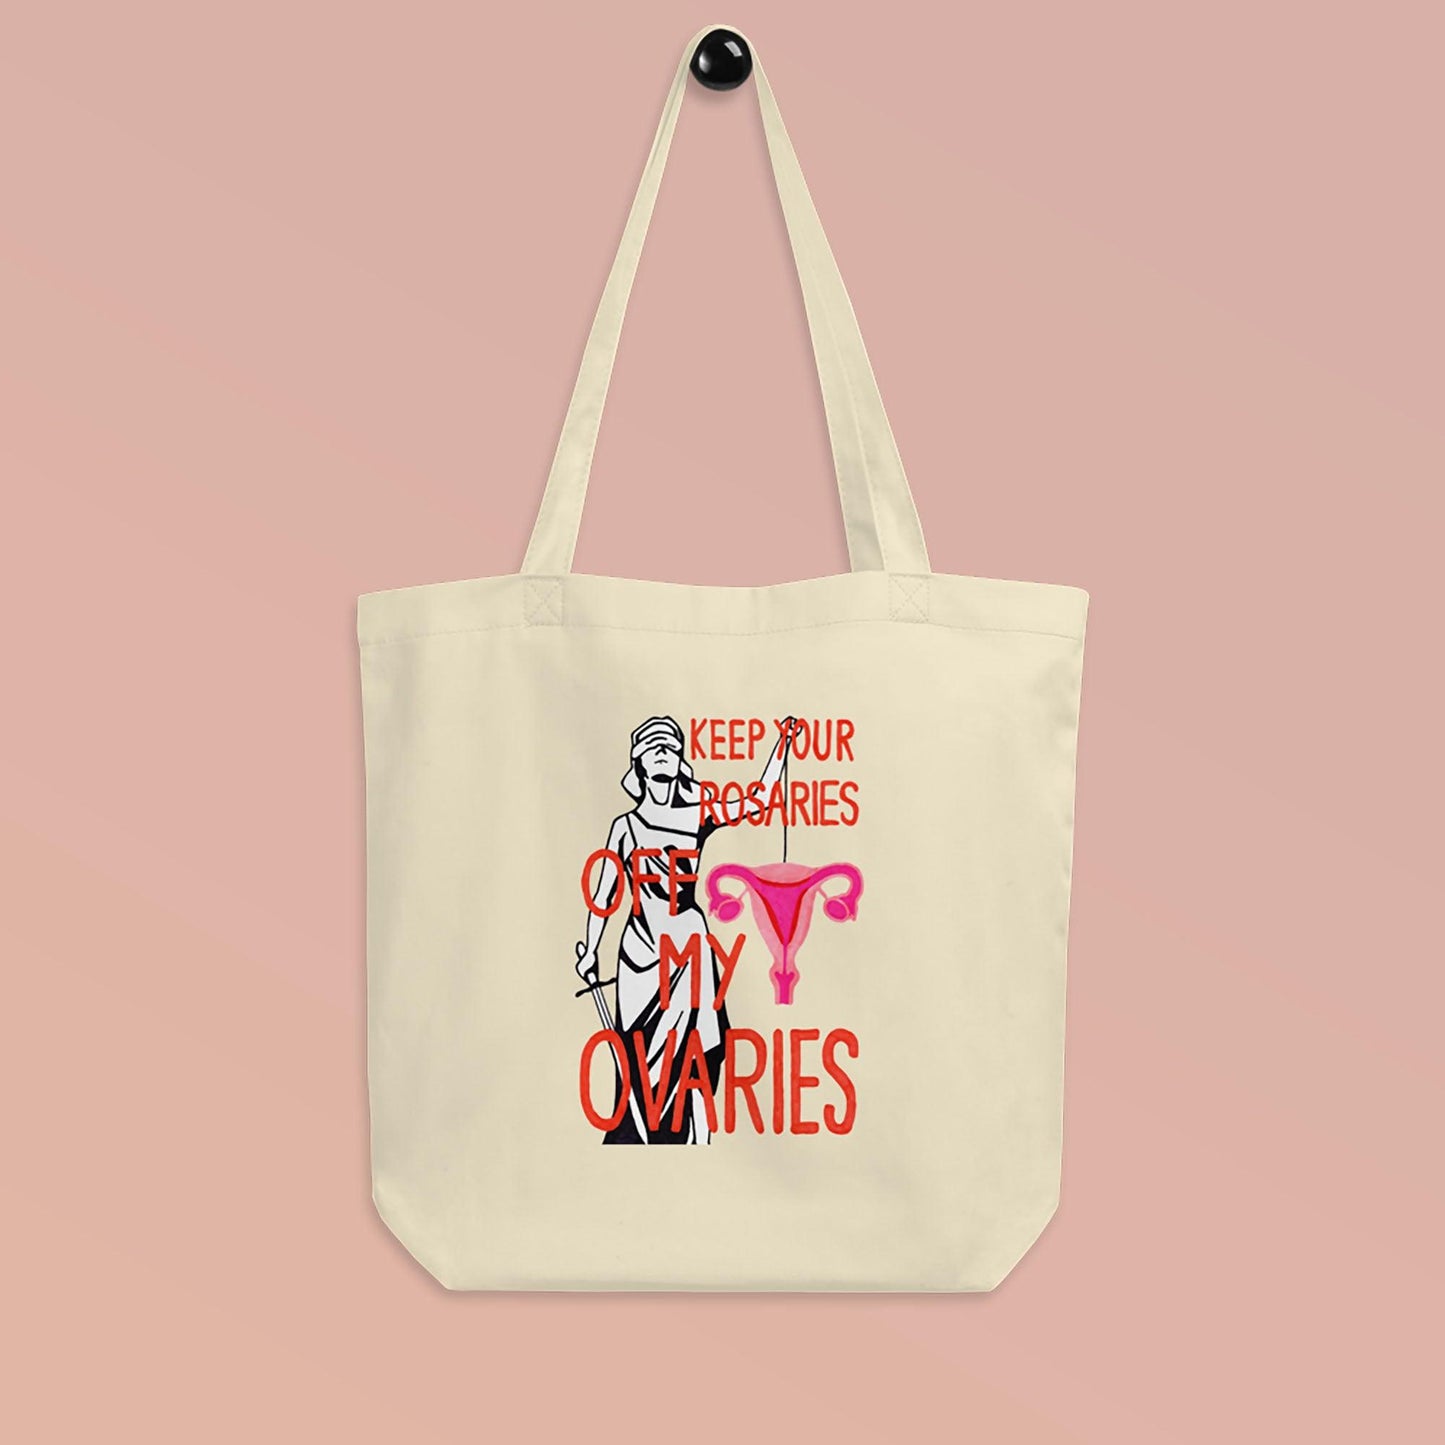 'Keep Your Rosaries Off My Ovaries' Eco Tote Bag - Candid Almond